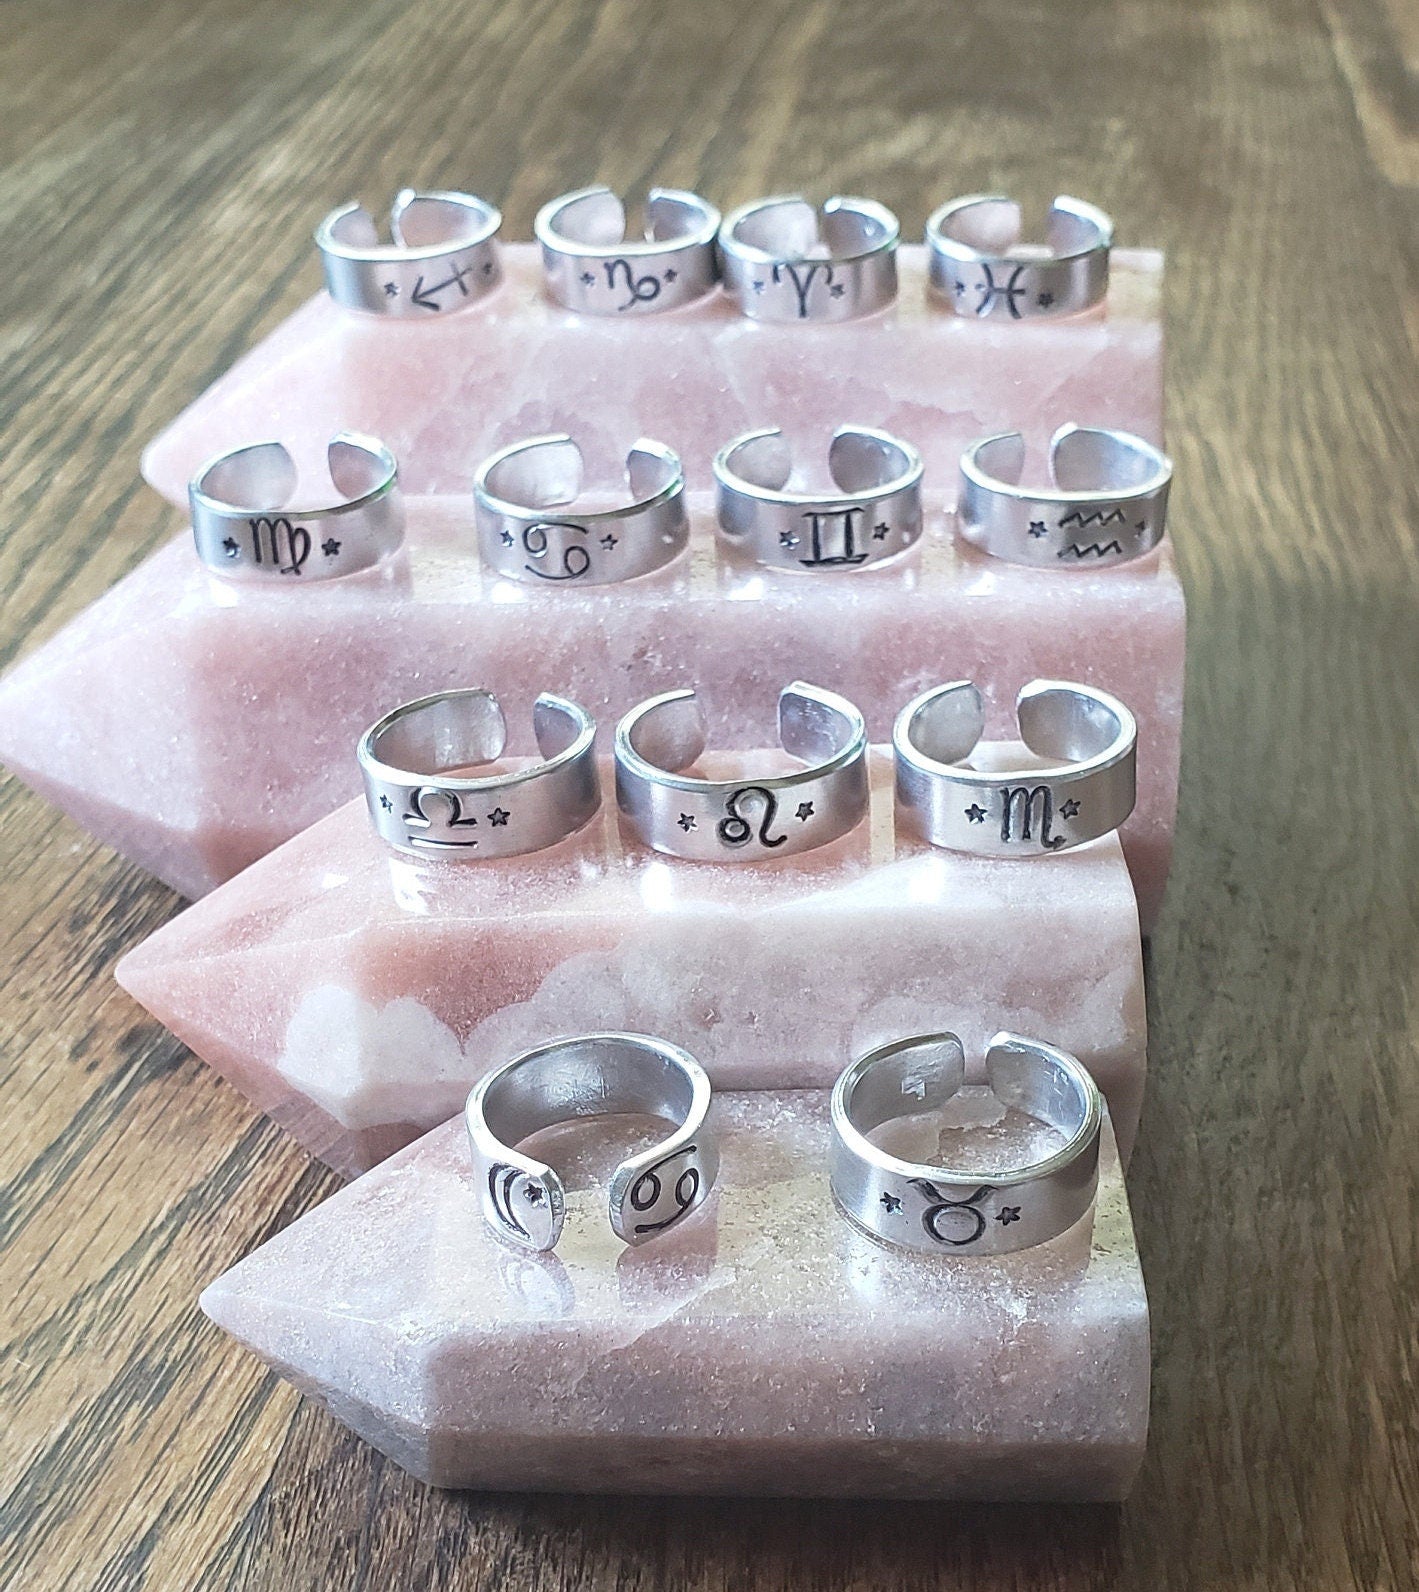 ZODIAC Rings | Handstamped Tarnish Resistant Silver Zodiac Rings | Moon and Star Signs |  Silver Horoscope Rings | Scorpio Leo Libra